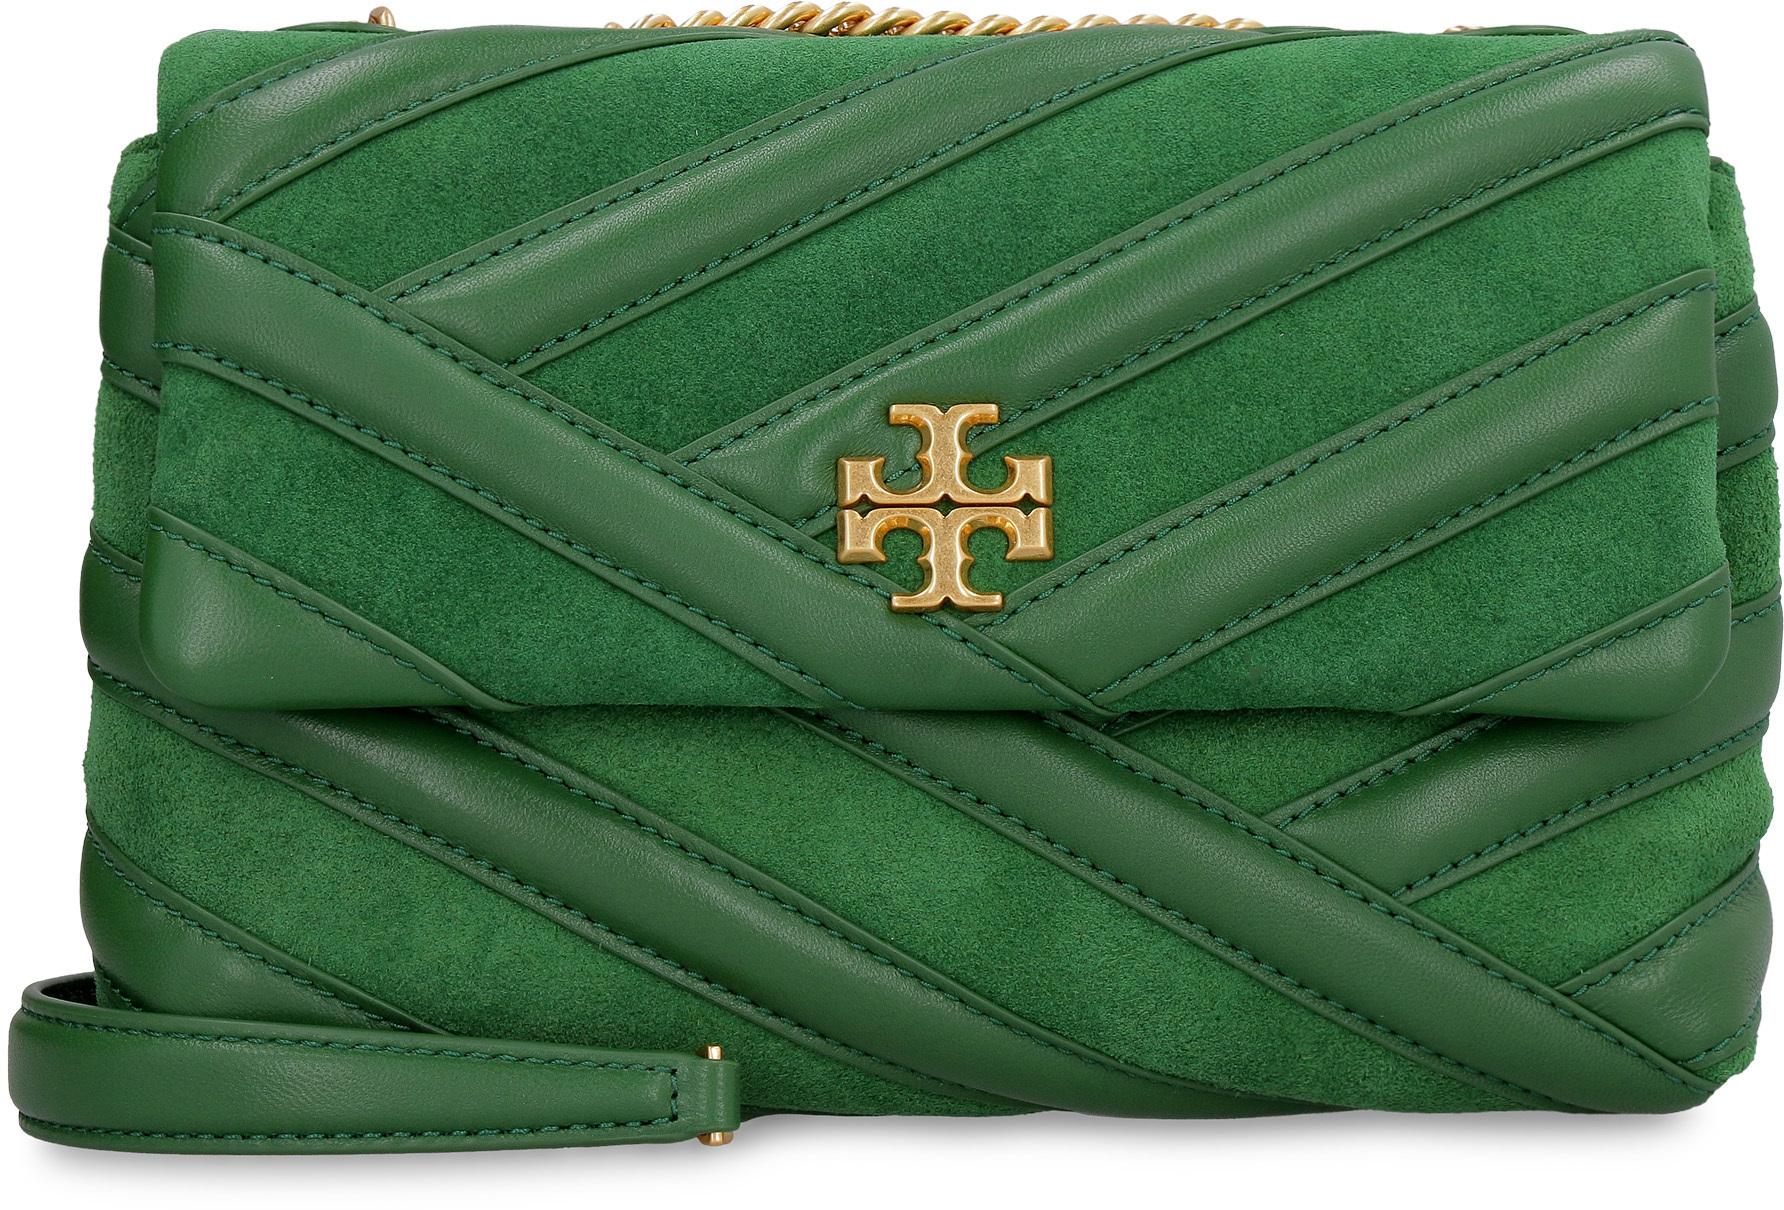 Tory Burch Kira Leather And Suede Bag in Green